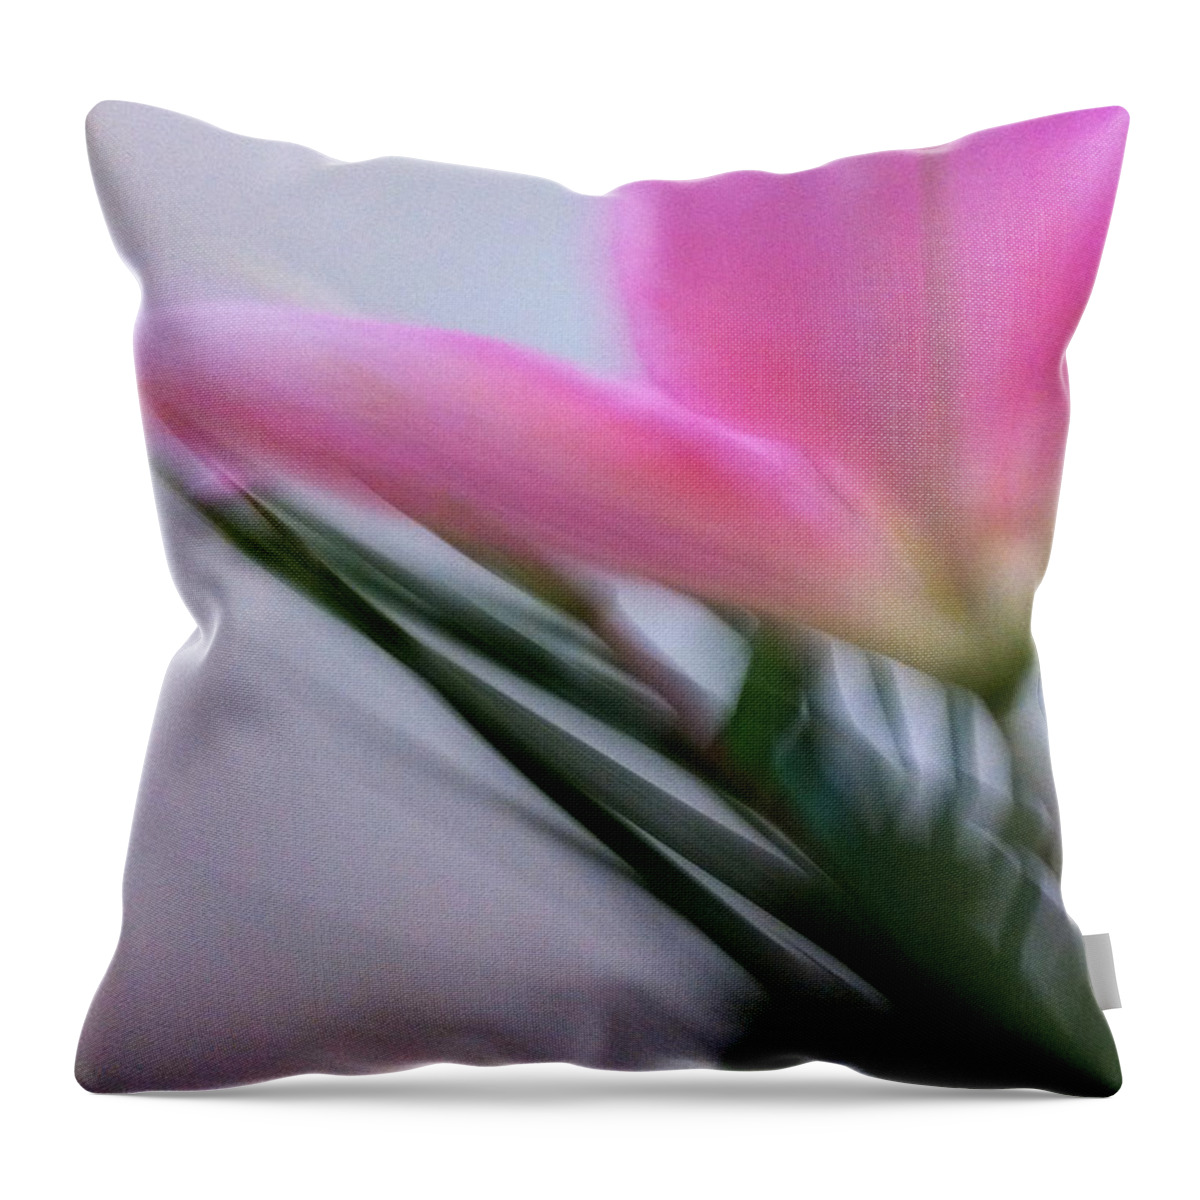 My Moving Portrait Of A Pink Lily. Throw Pillow featuring the photograph Lily in Motion by Kathy Corday